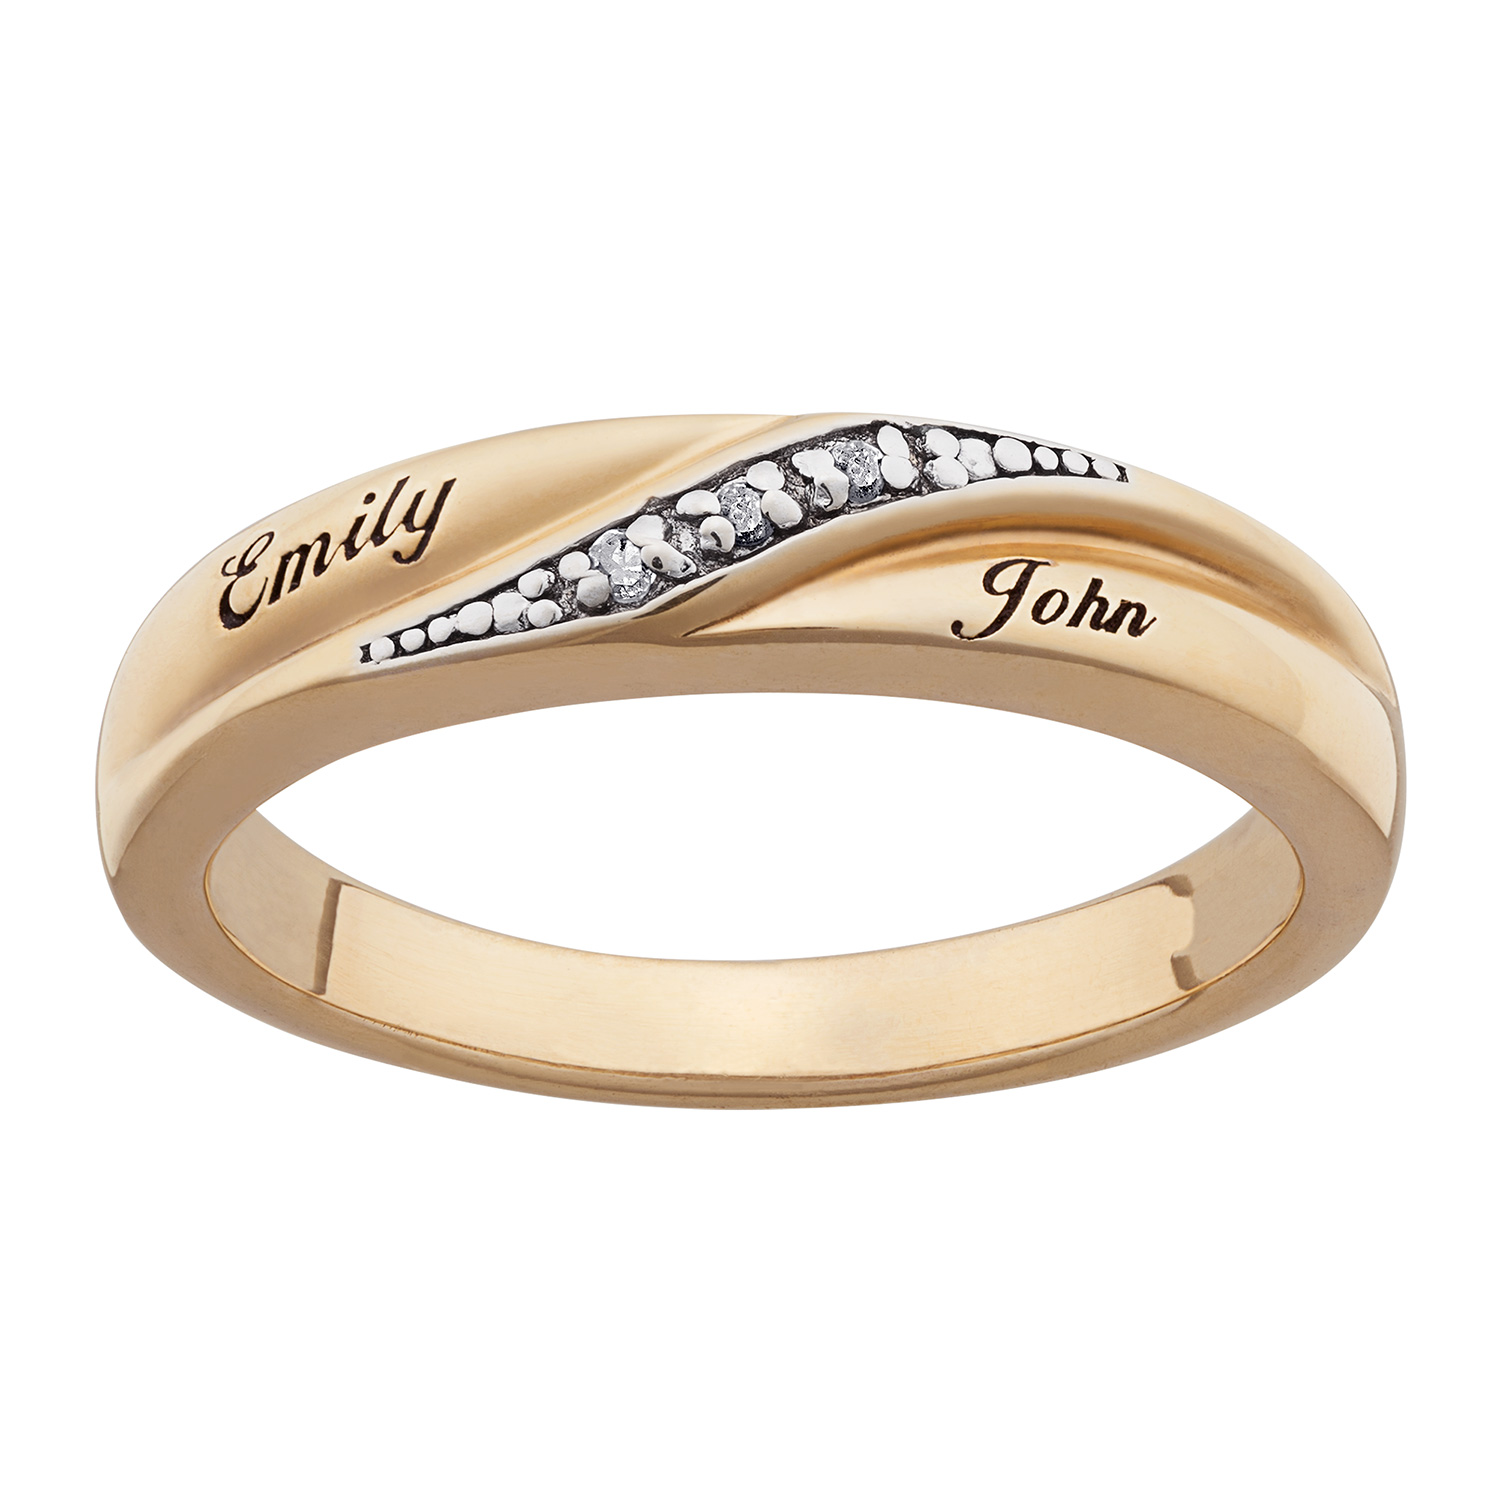 Ladies 18K Gold over Sterling Diamond Accent Name Wedding Band